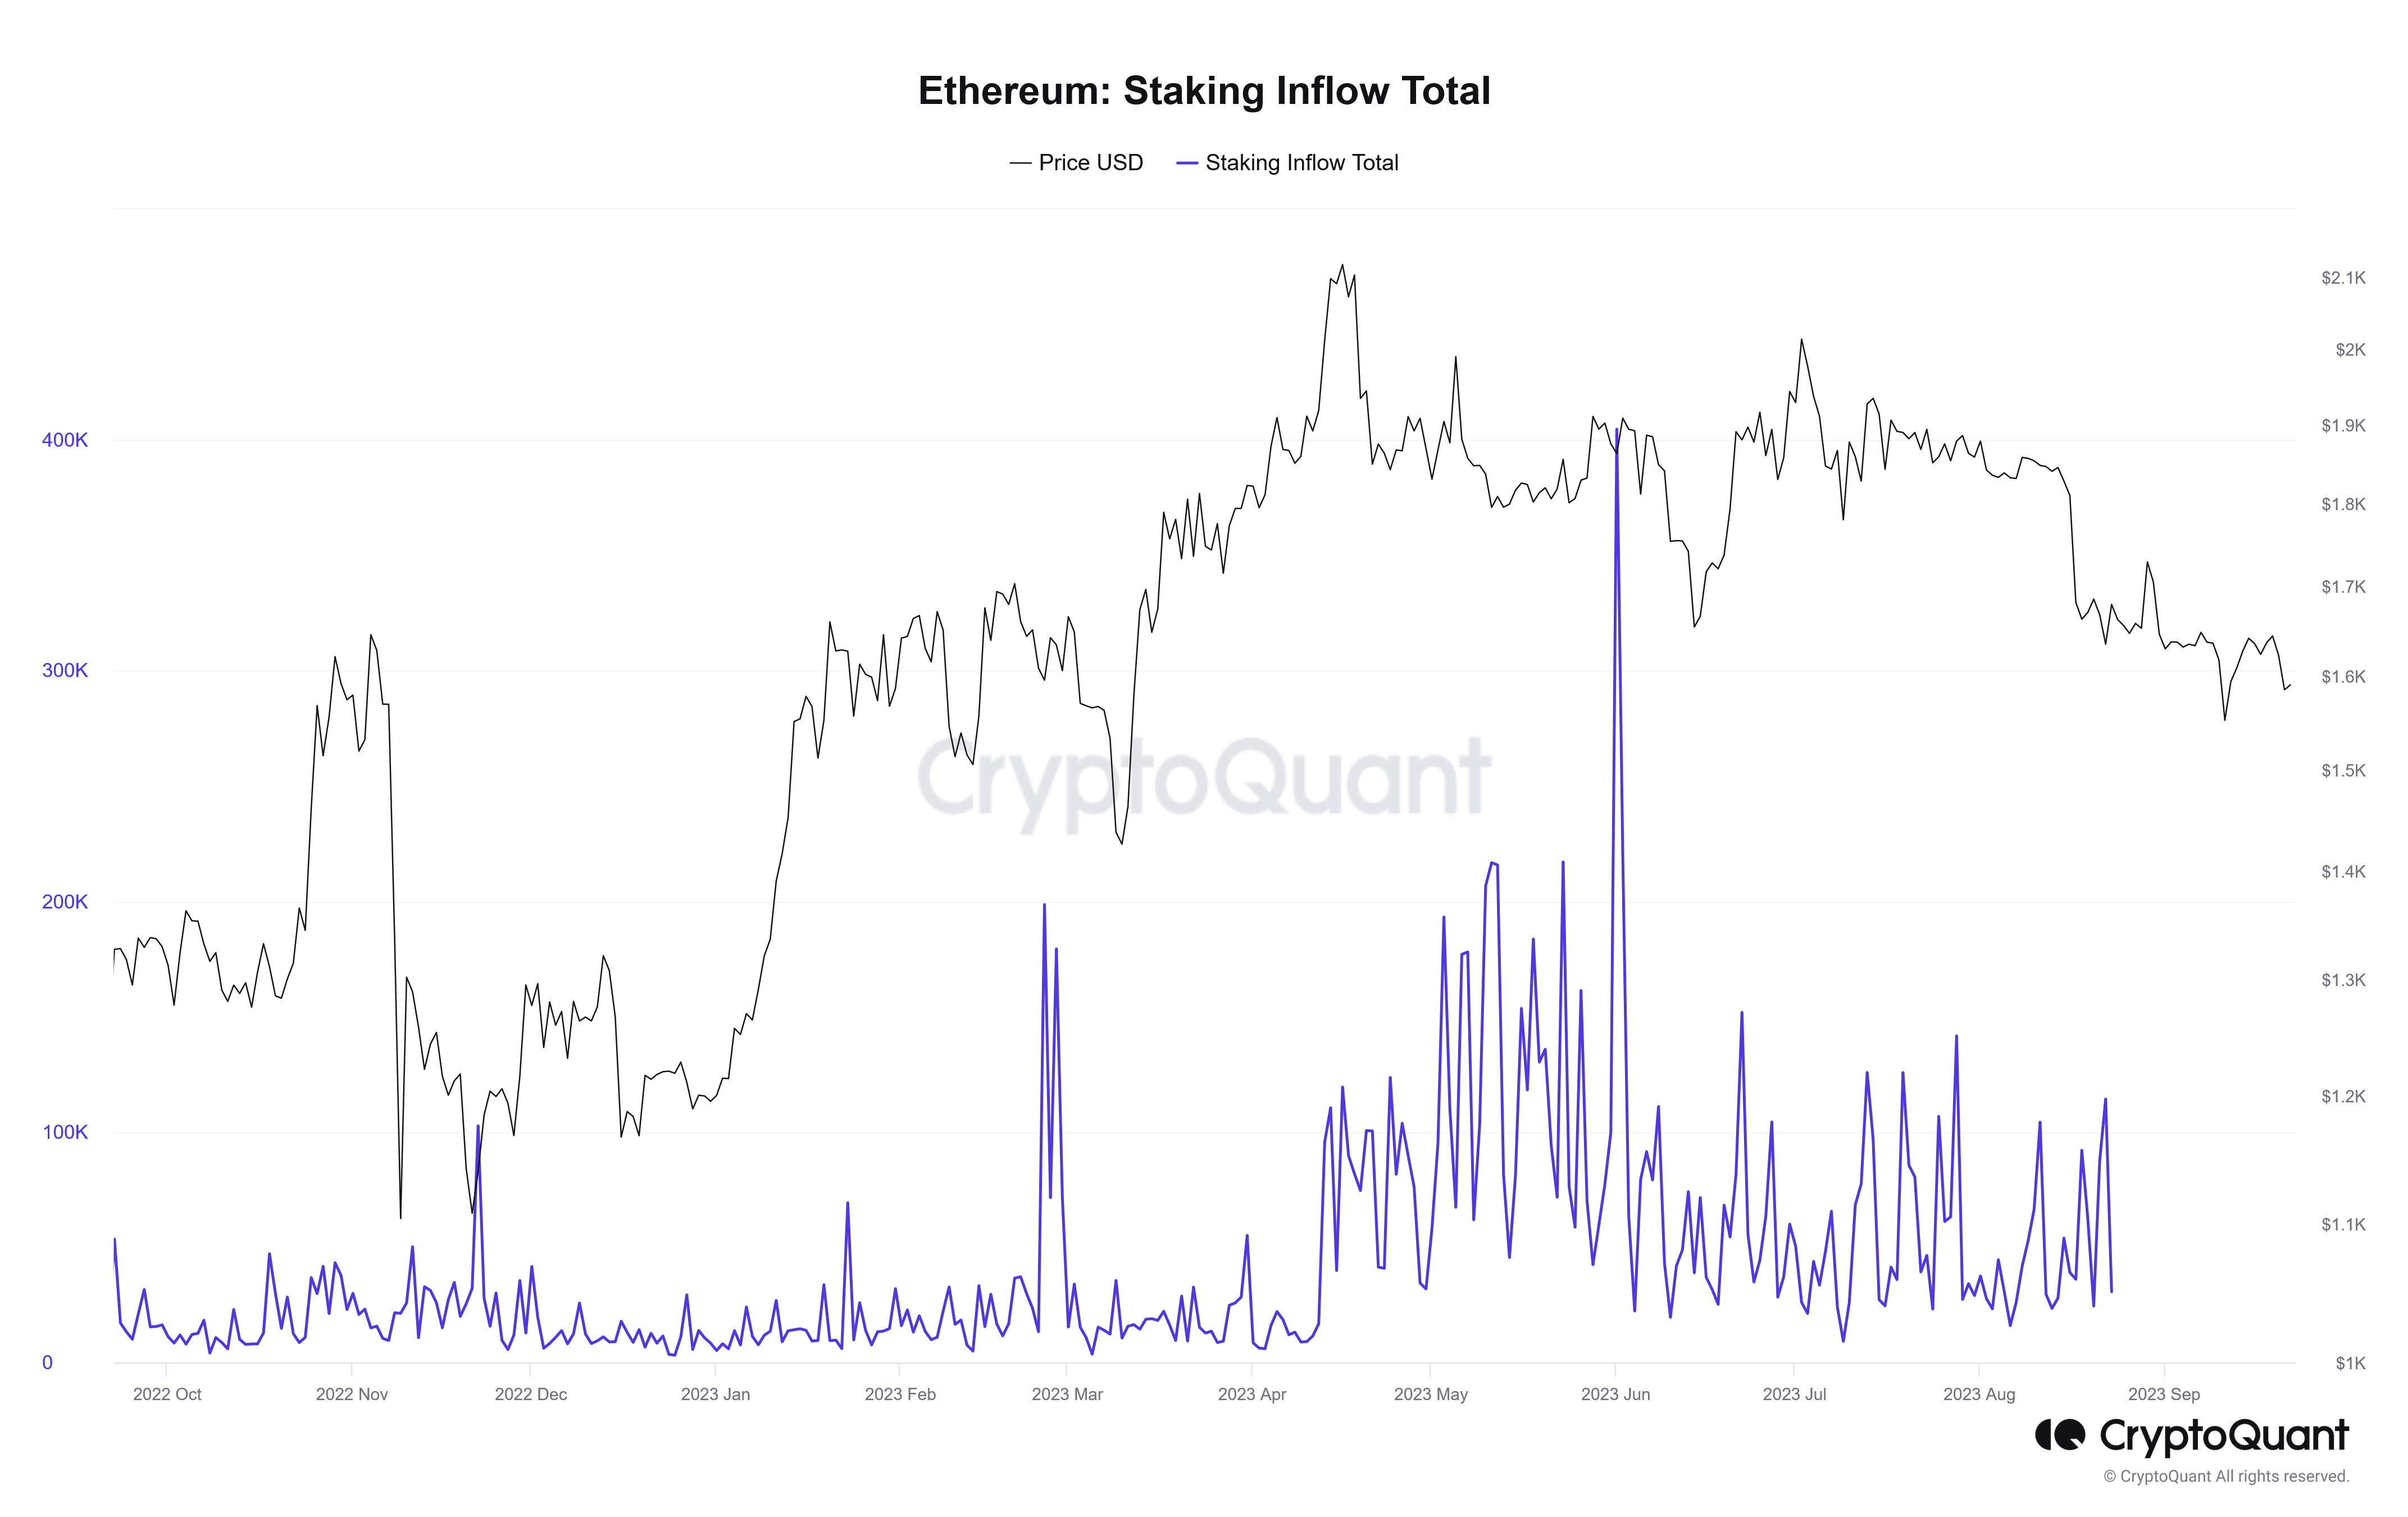 Ethereum staking inflow total| Source: CryptoQuant